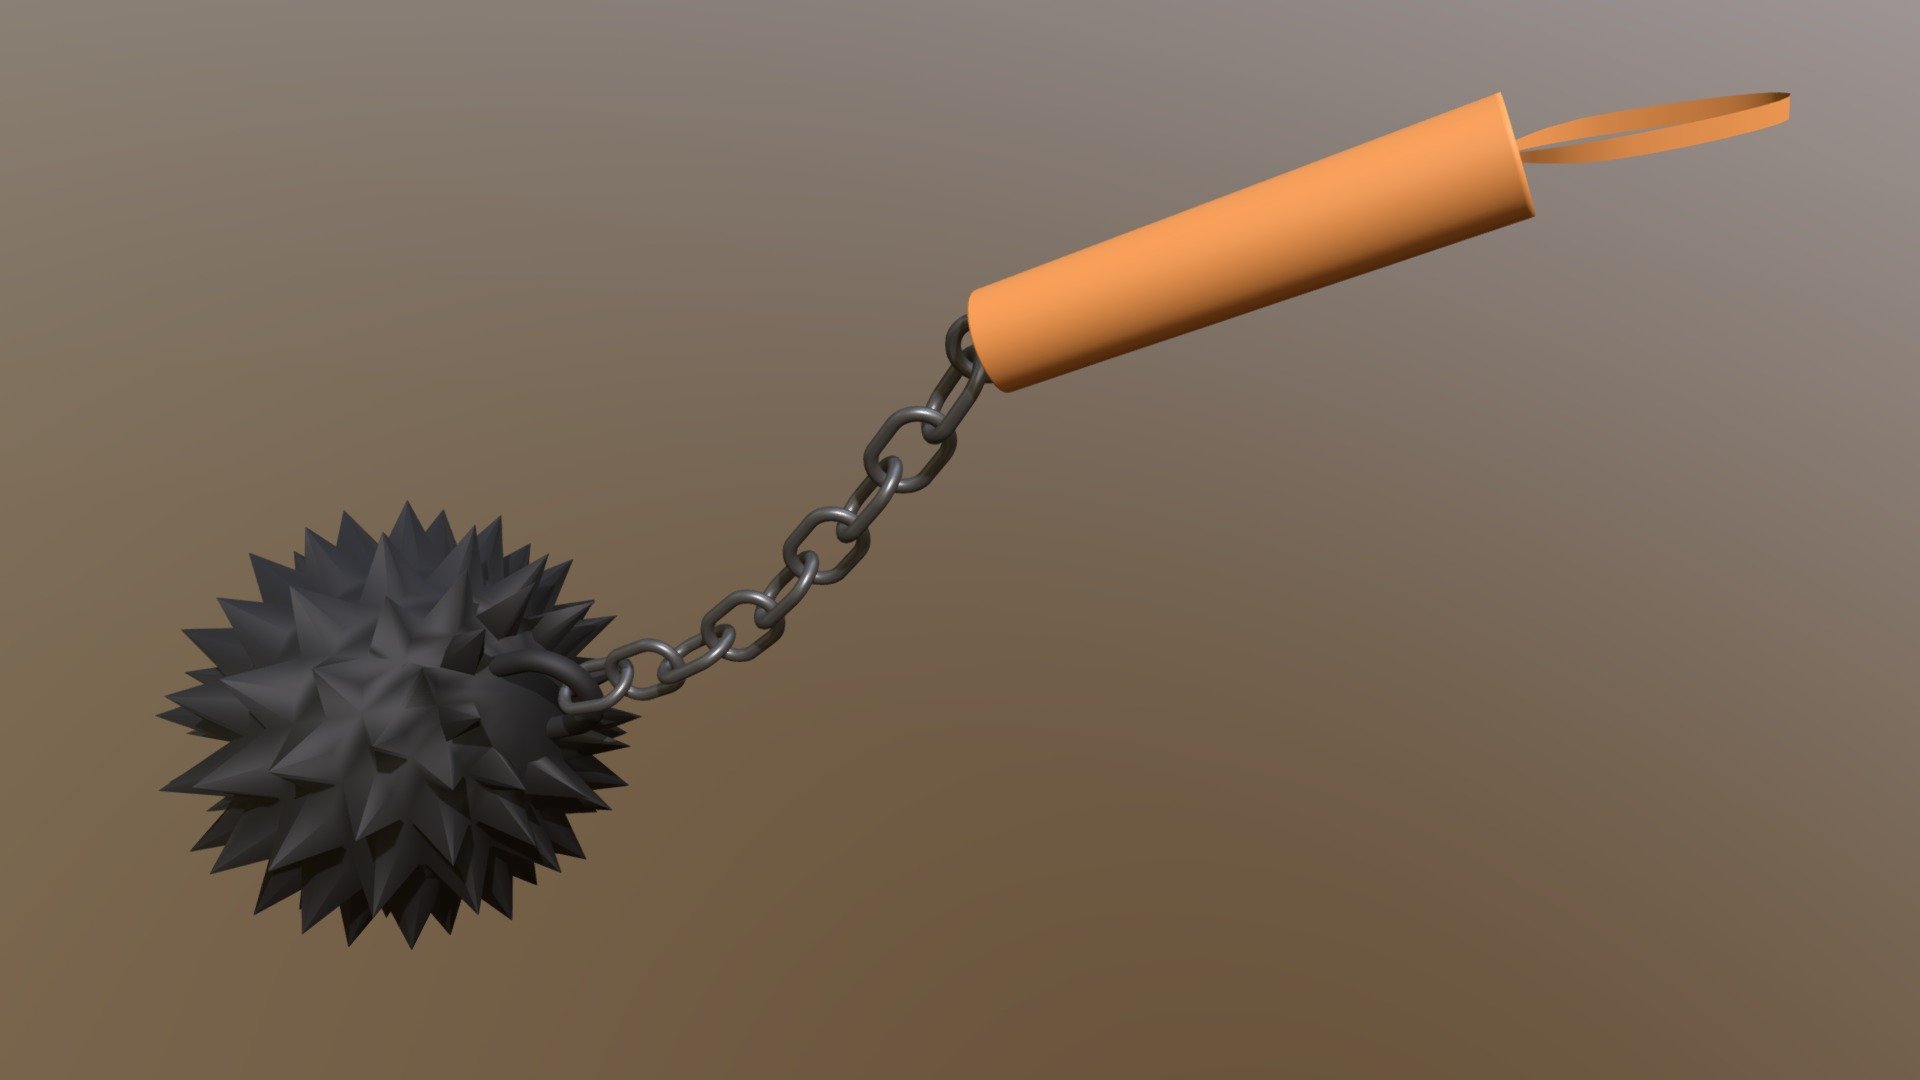 Ball Flail / spiked ball with chain and handle